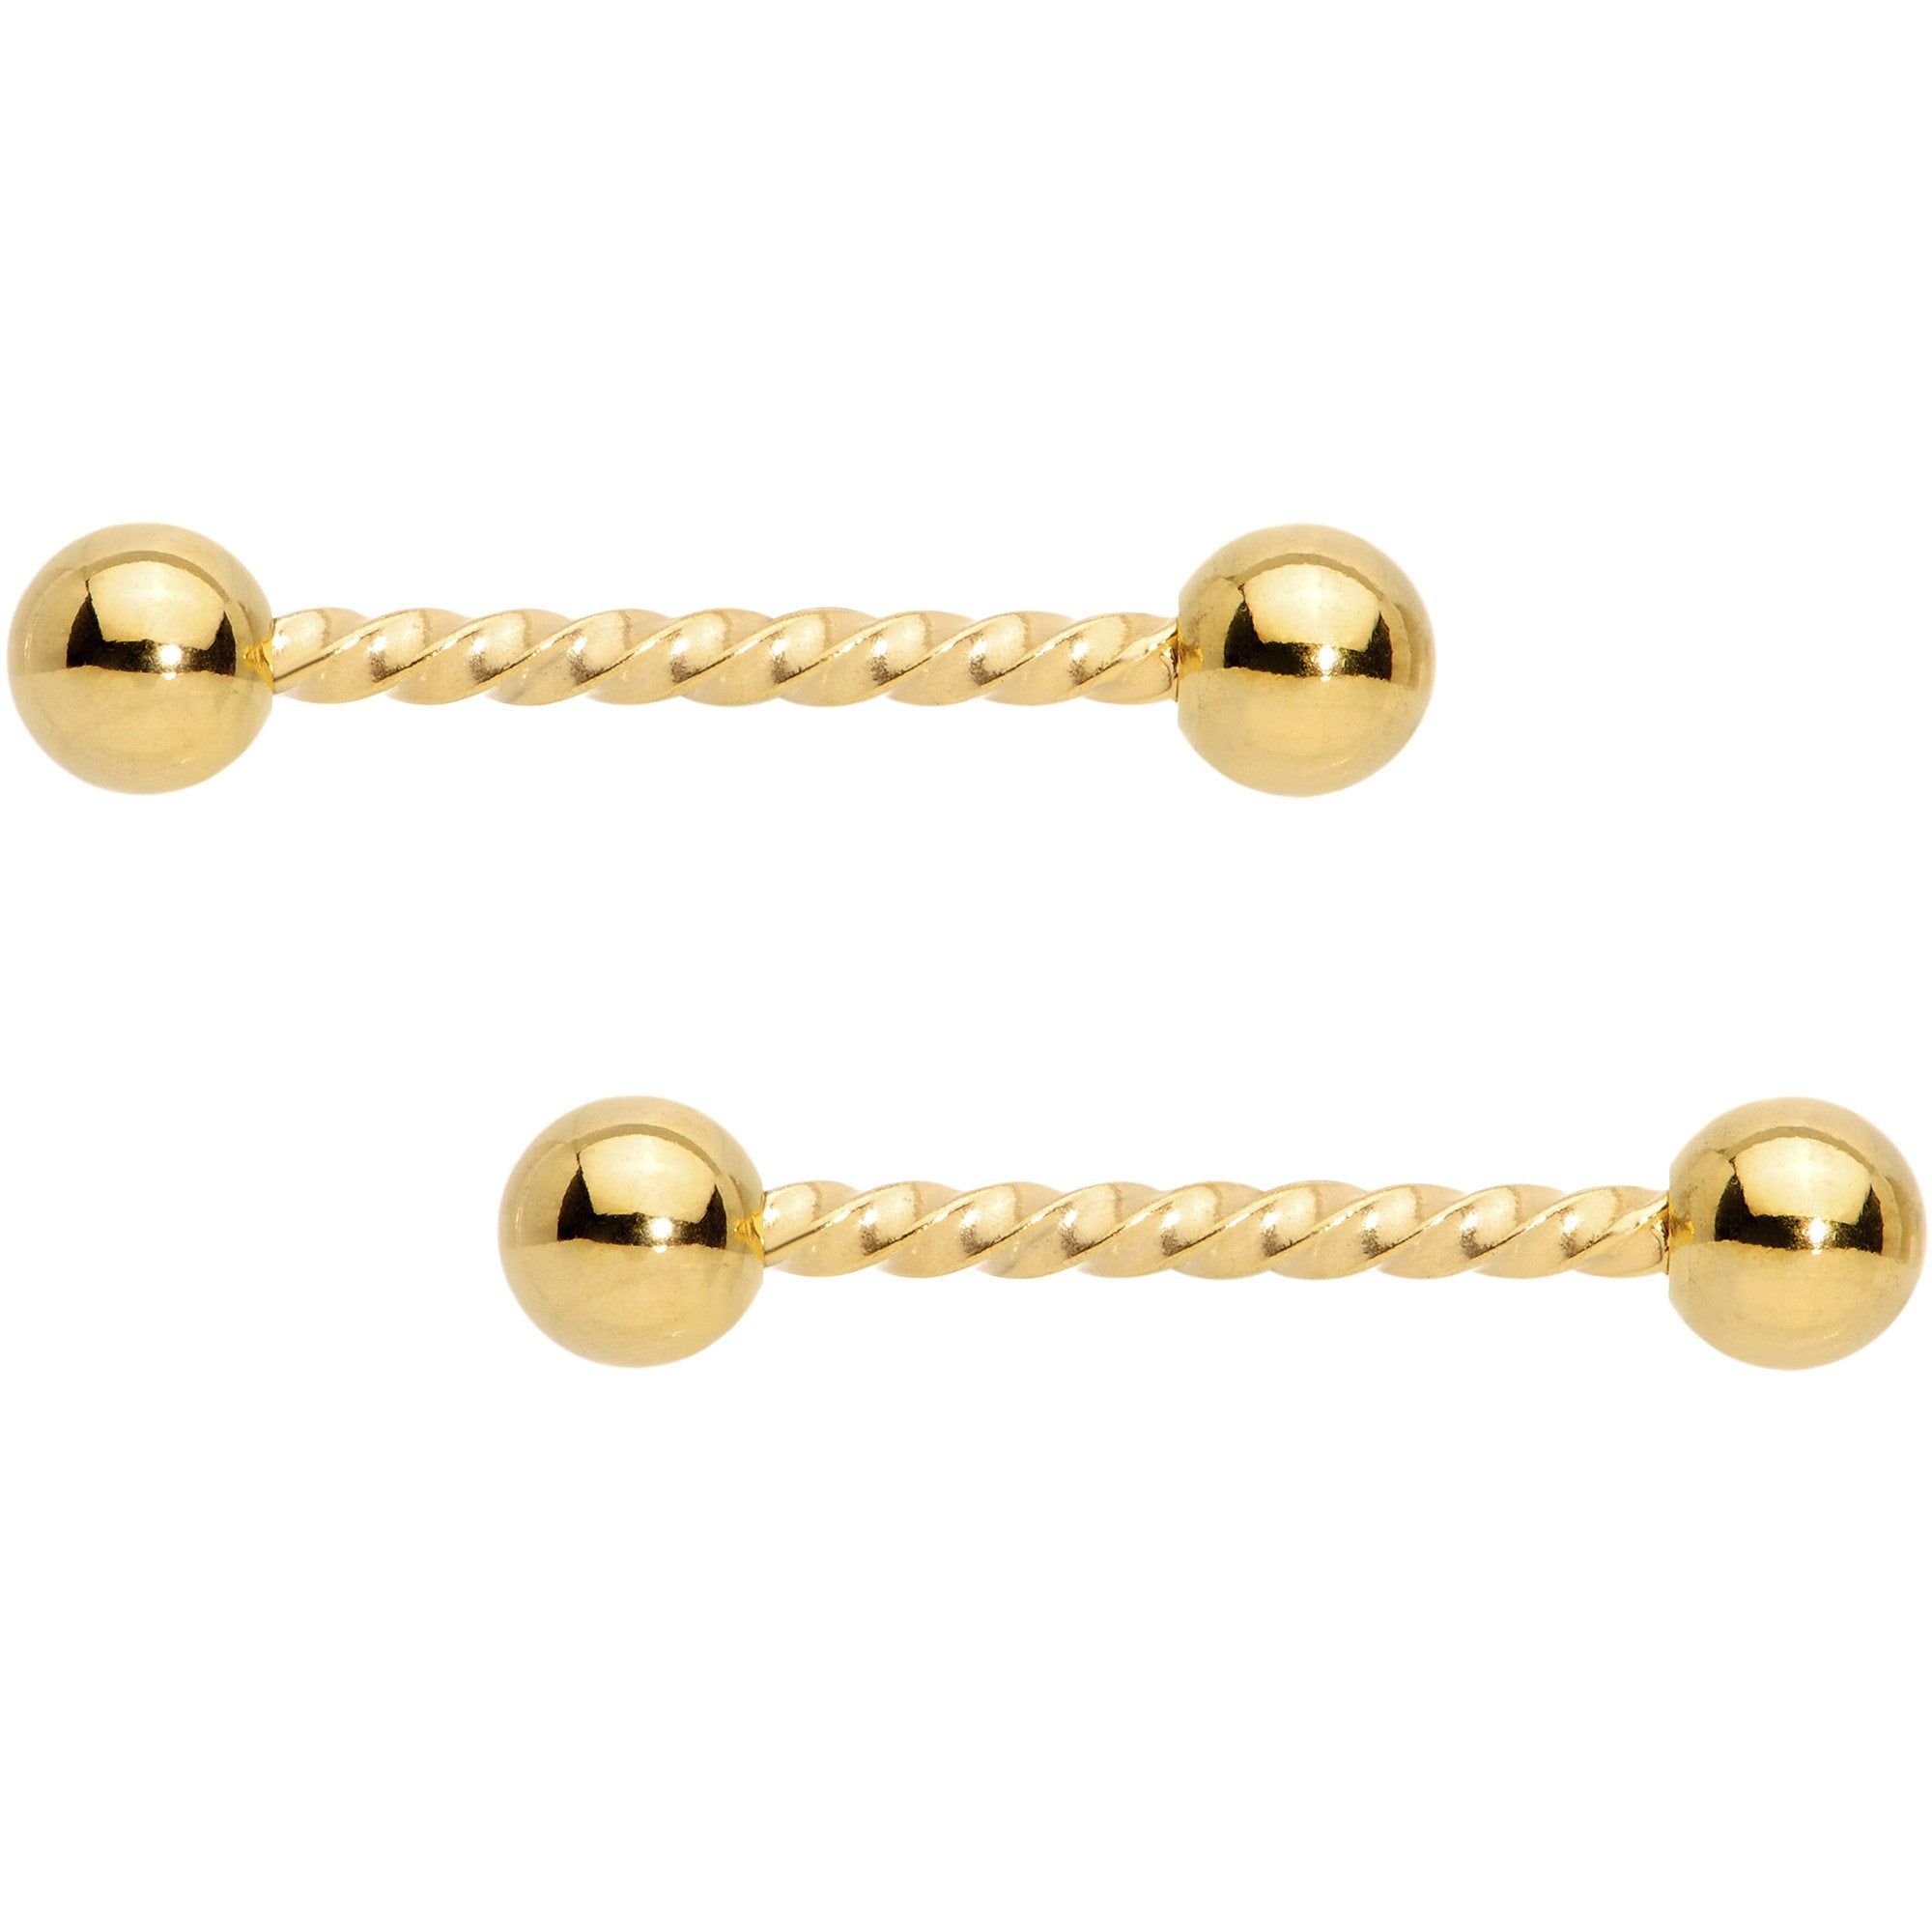 14 Gauge 5/8 Gold Tone Twisted Barbell Nipple Ring Set